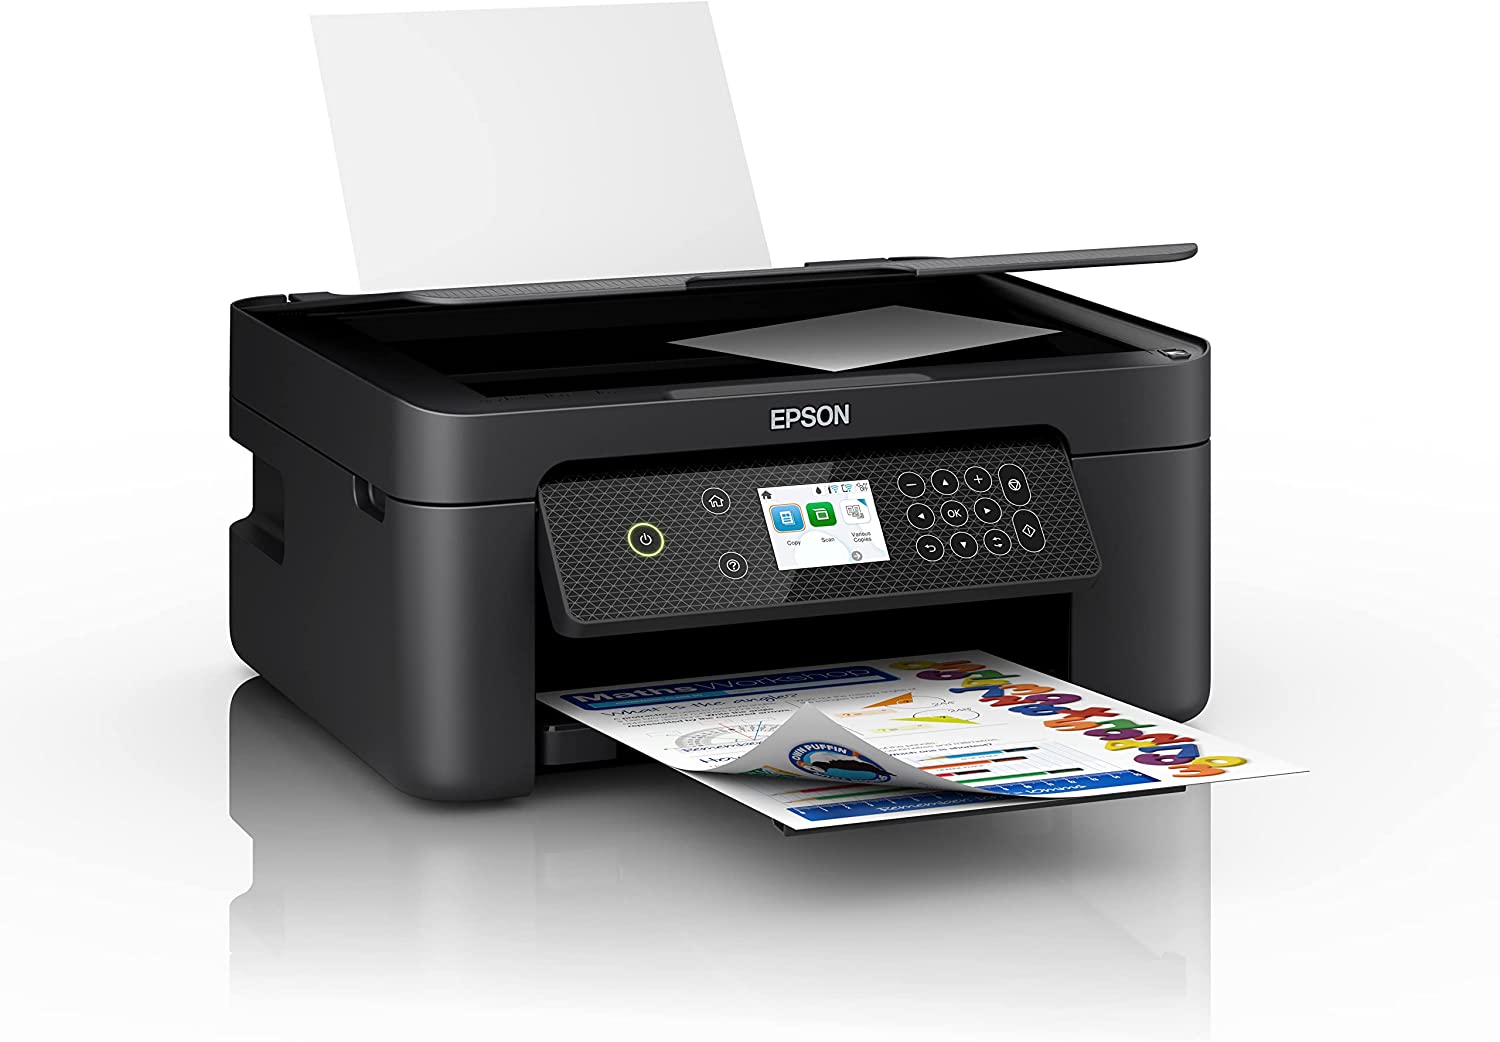 Epson Expression XP-4200 Multifuction Printer| GHI